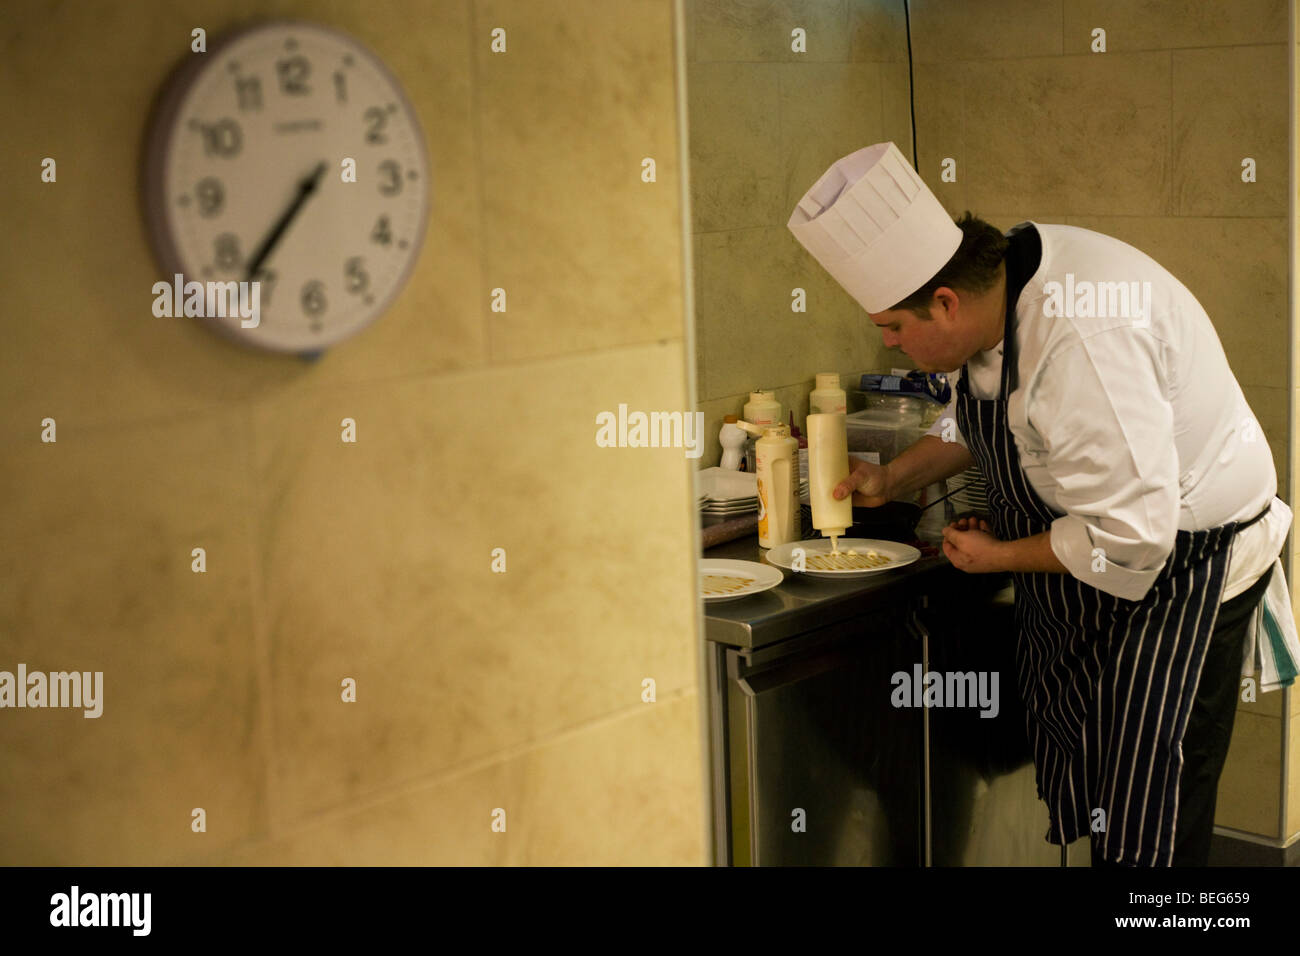 A chef puts finishing touches on deserts in the kitchens at the Vivre restaurant in Sofitel. Stock Photo